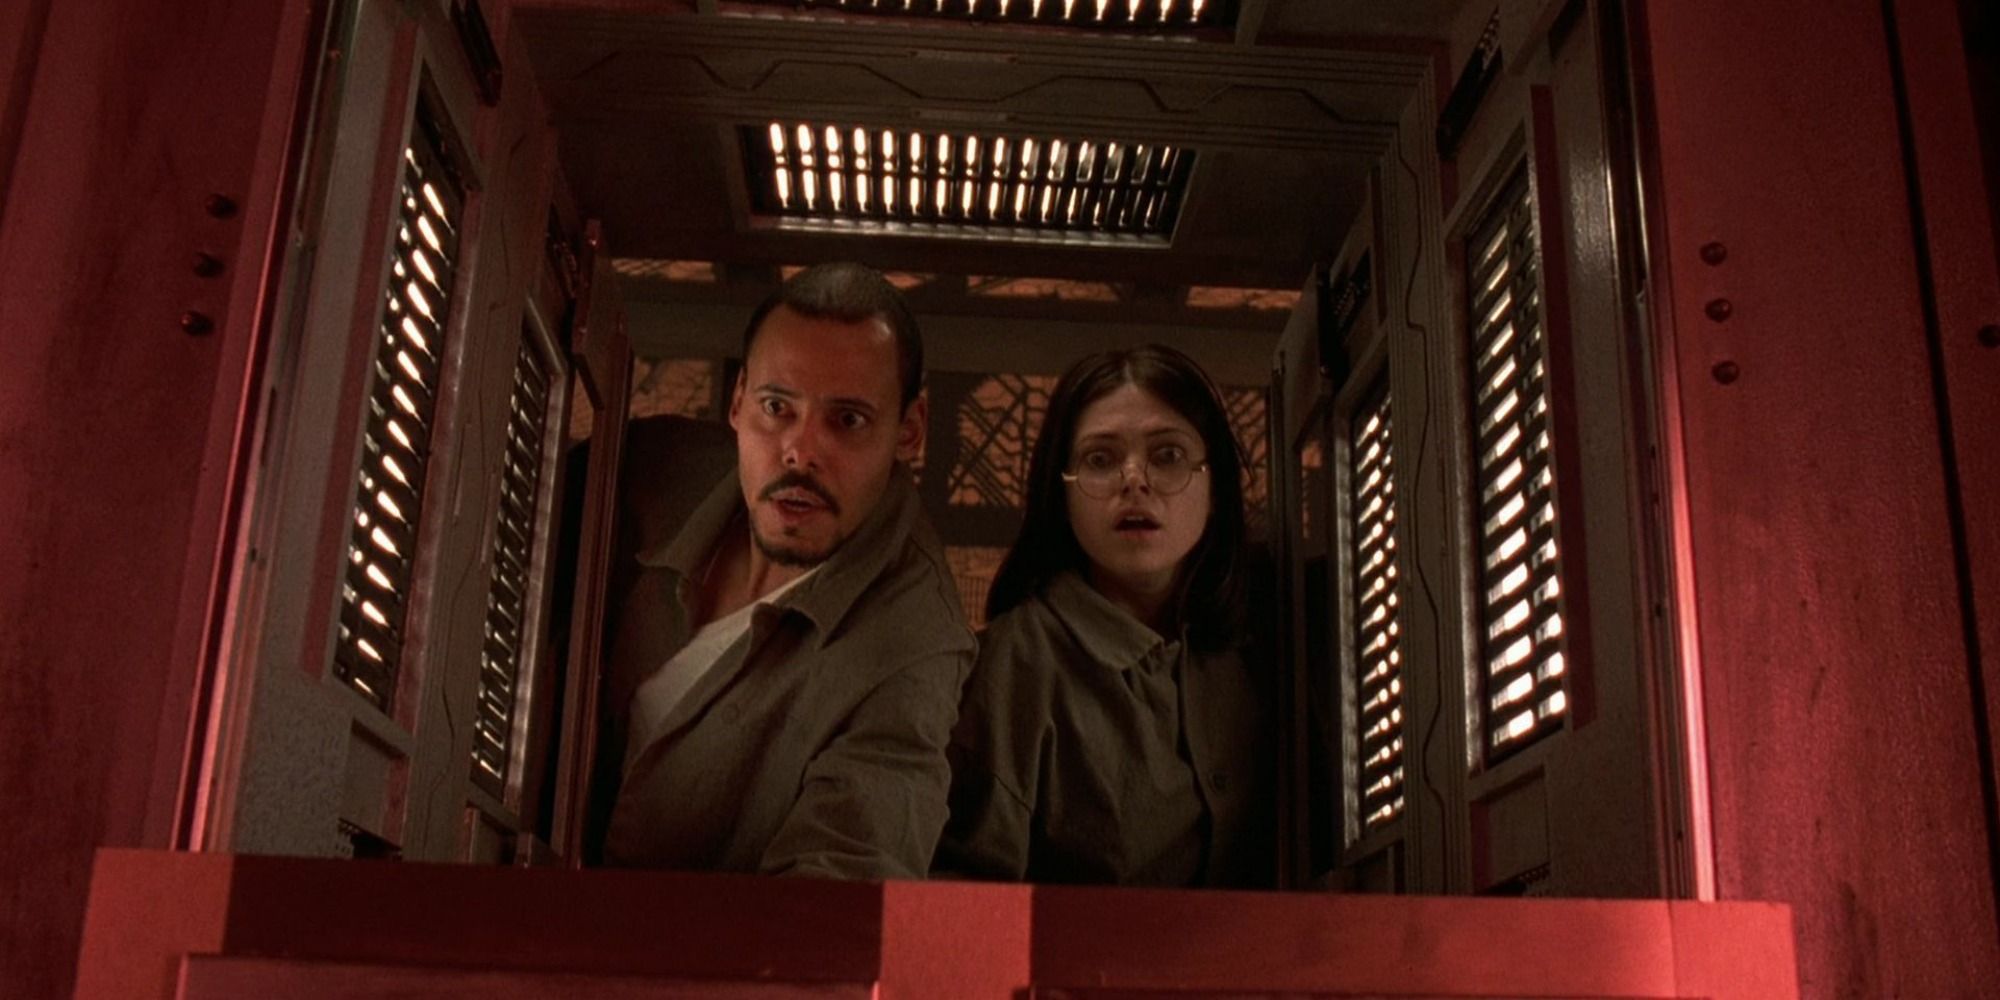 Quentin and Joan looking horror through a hatch in Cube (1997)